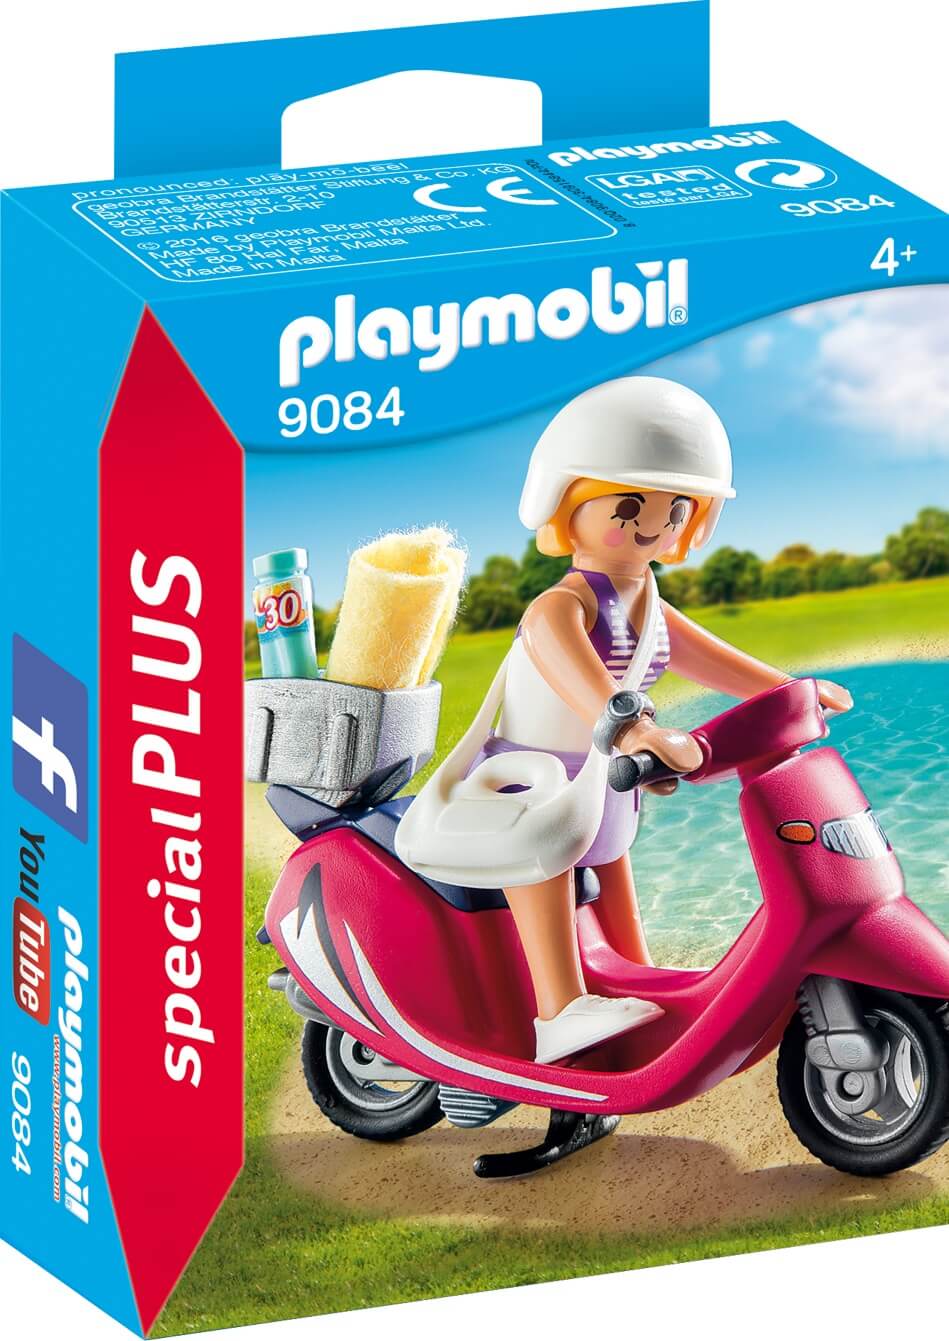 Mujer con Scooter ( Playmobil 9084 ) imagen b